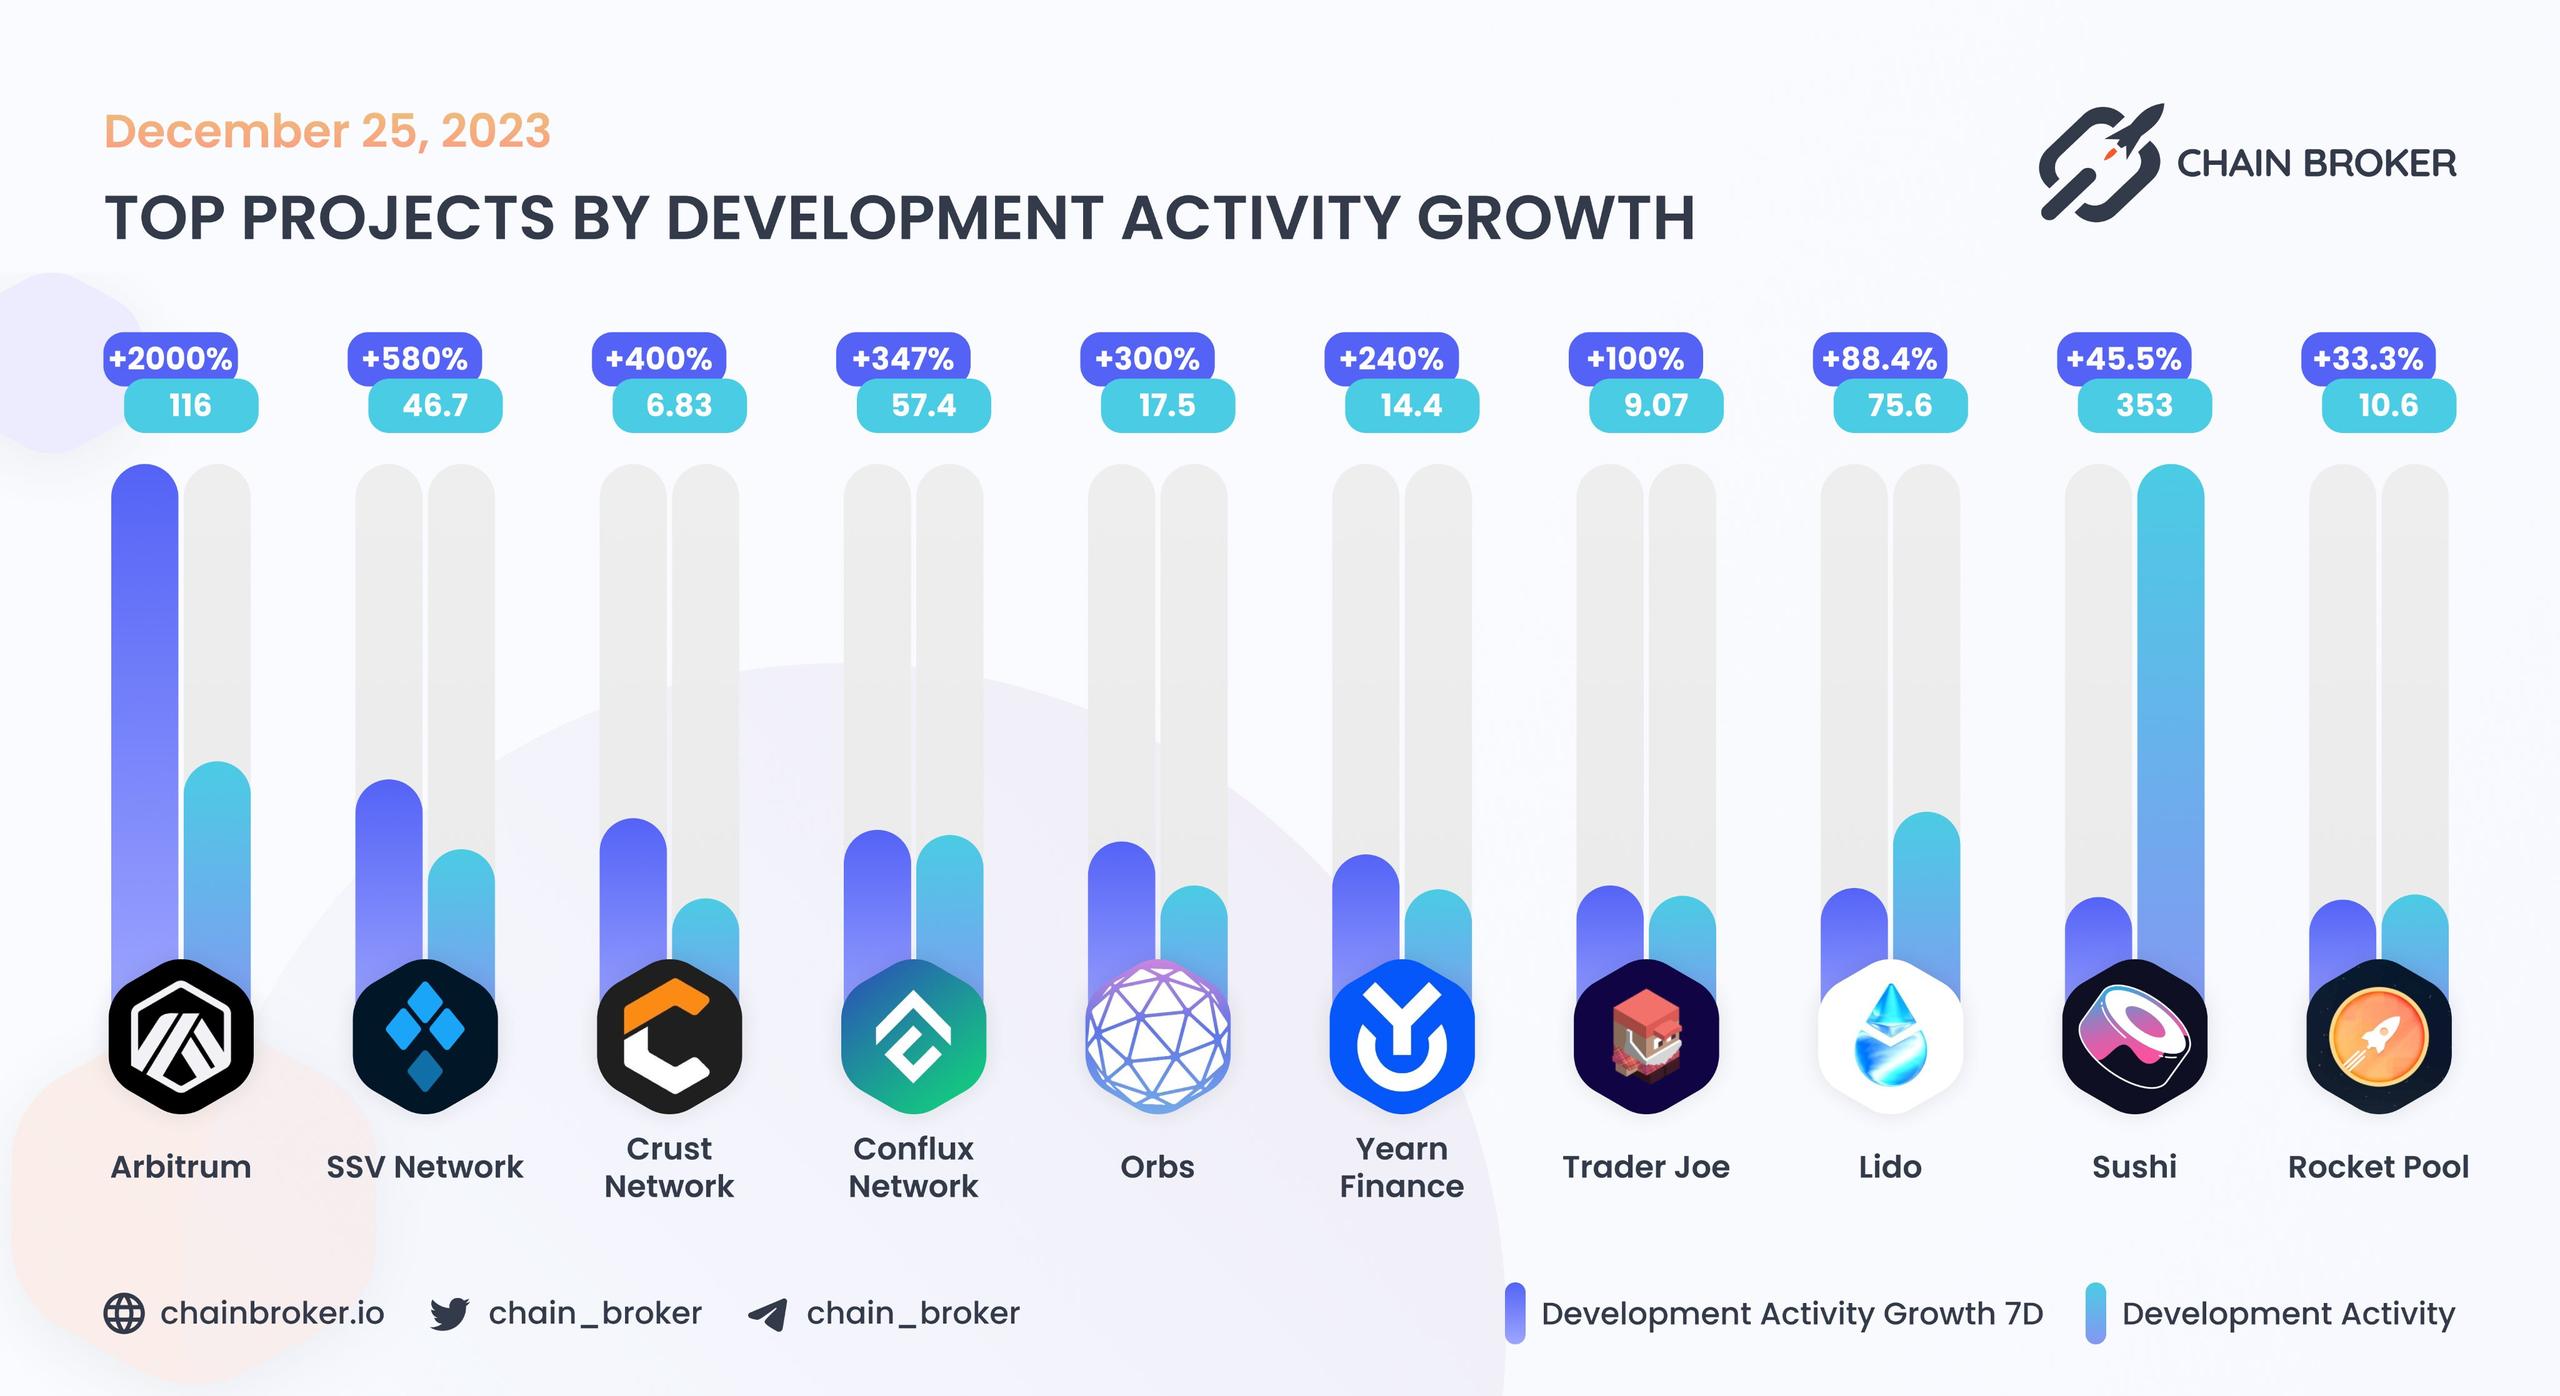 Top projects by development activity growth